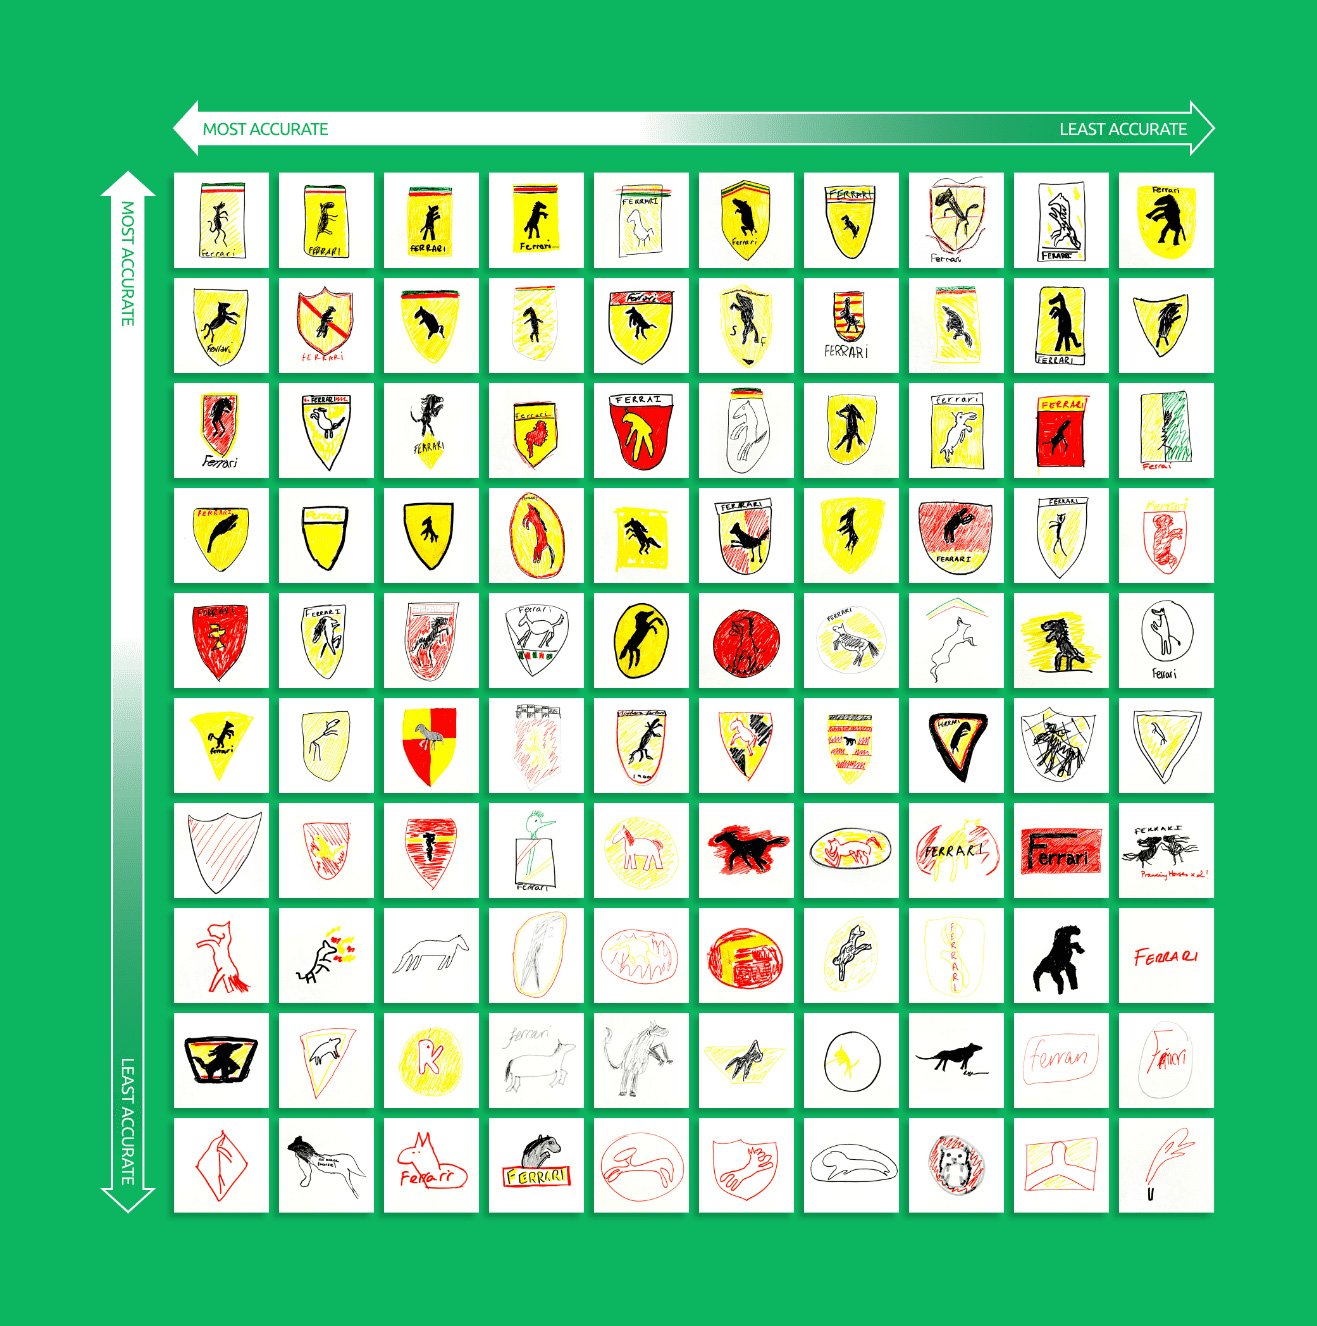 Over 150 People Drew 10 Iconic Logos From Memory, And The Results